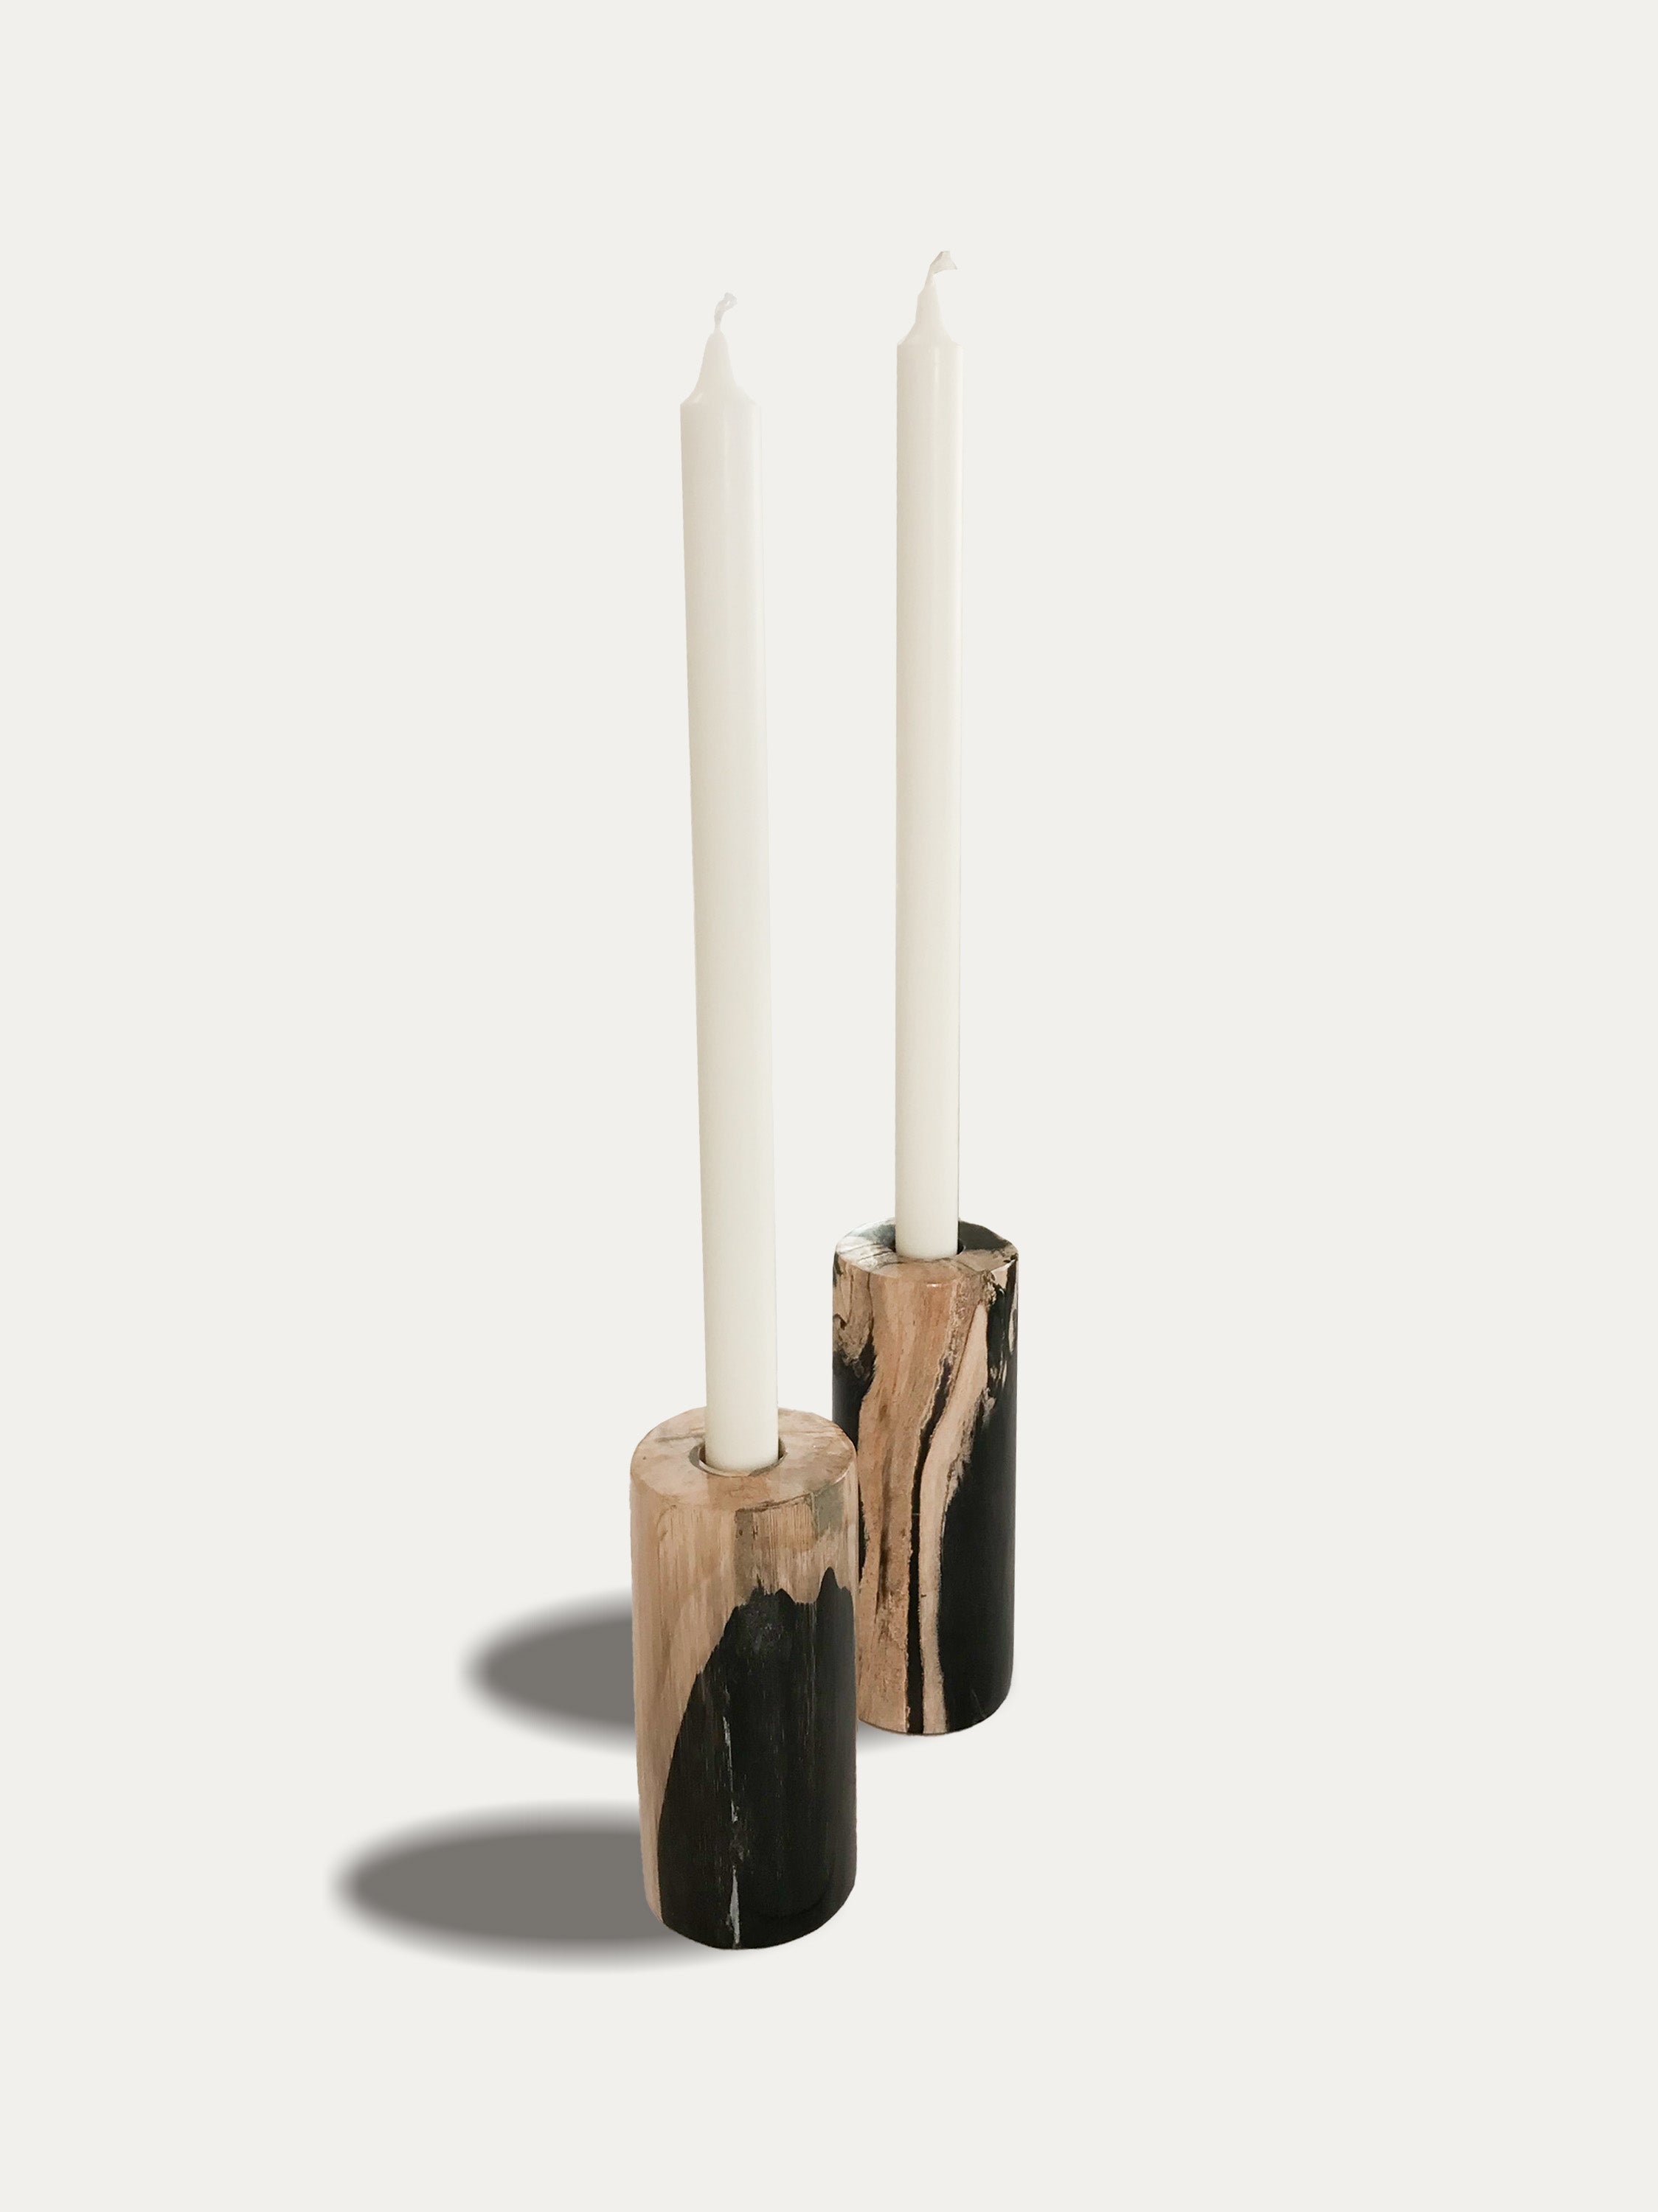 Set of 2 tall reversible candle holders in petrified wood